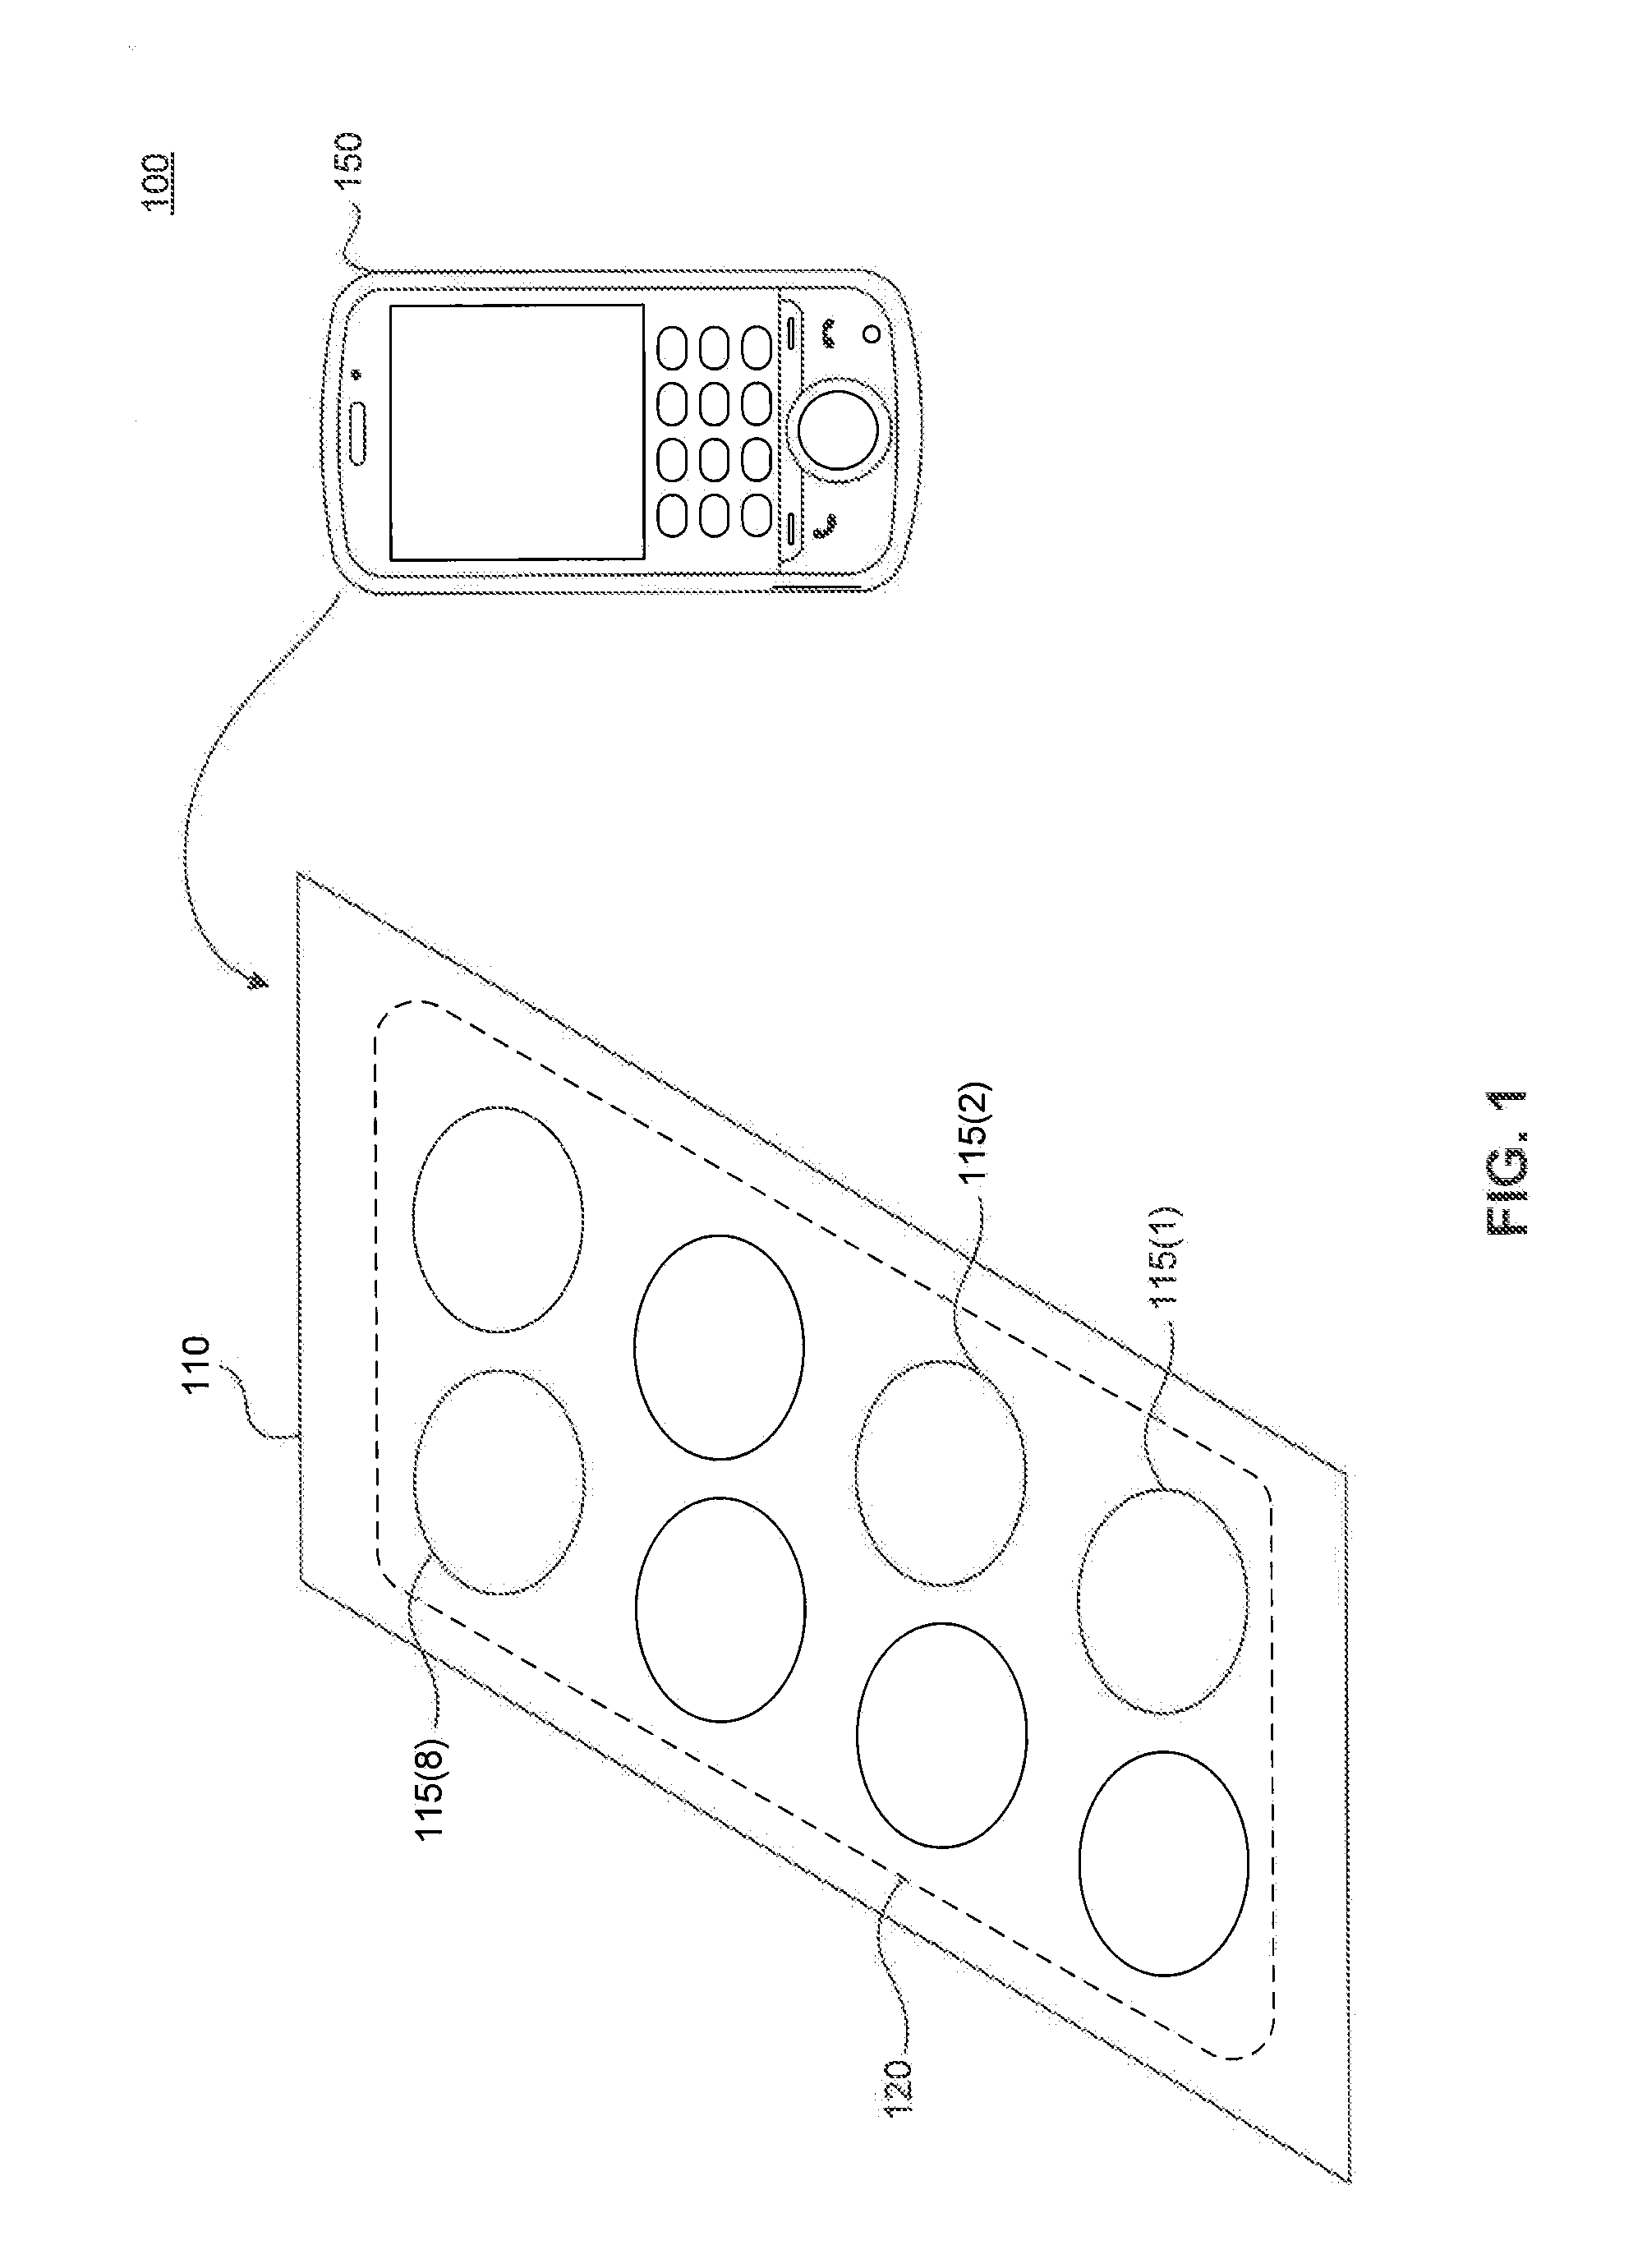 Method and System for Wireless Power Transfer Calibration